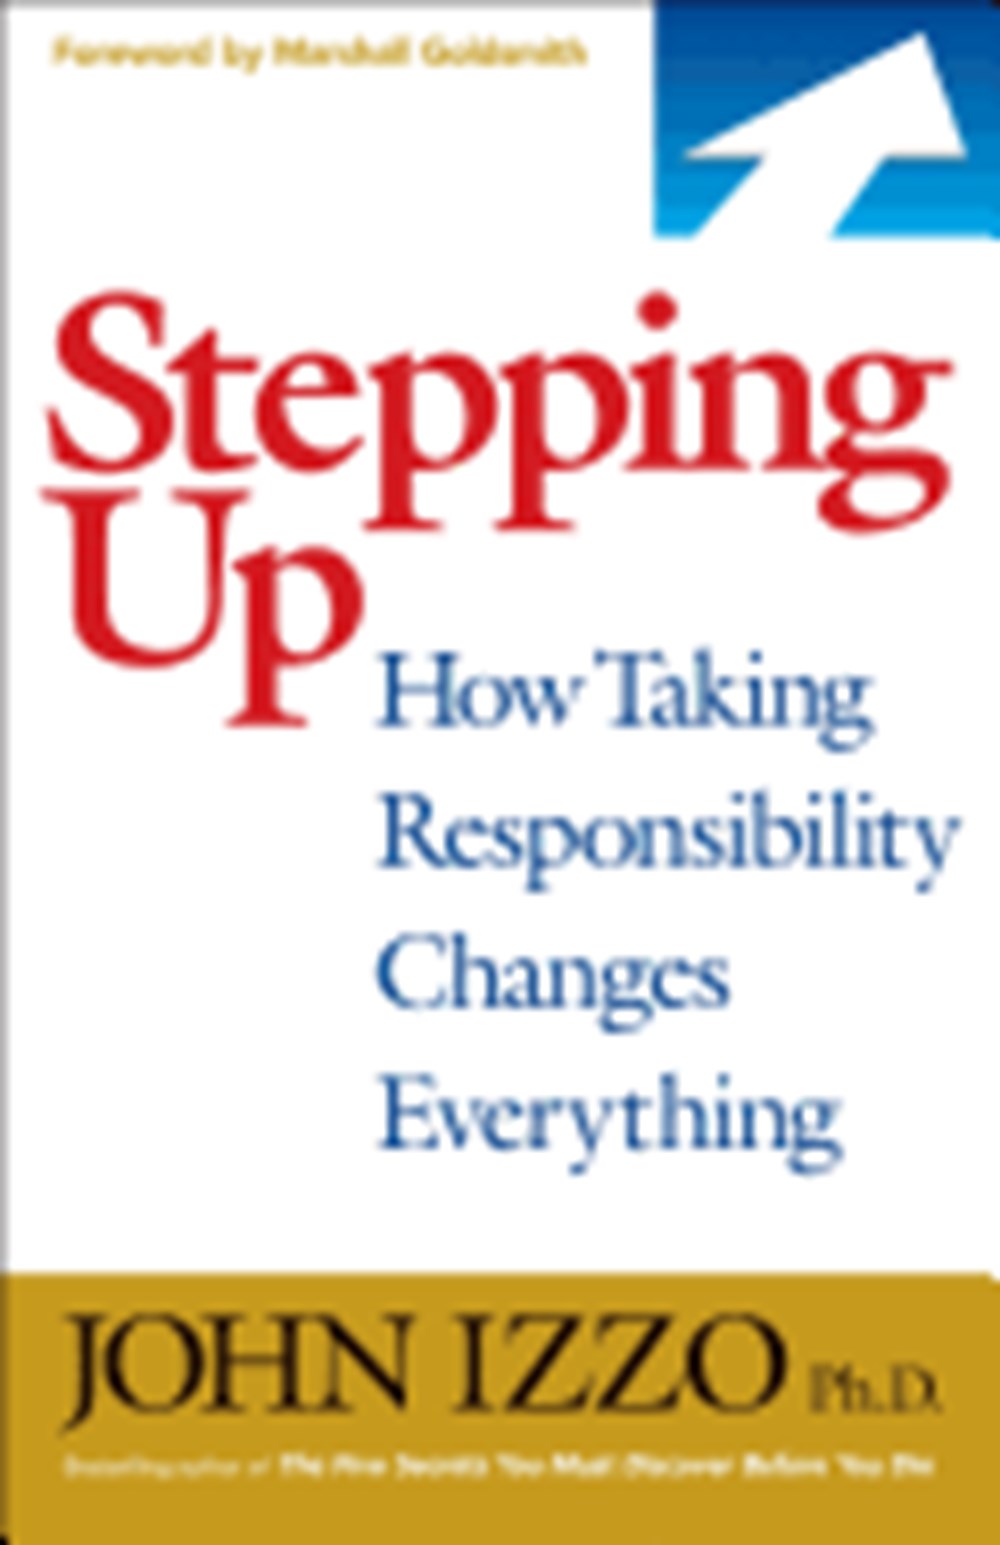 Stepping Up How Taking Responsibility Changes Everything